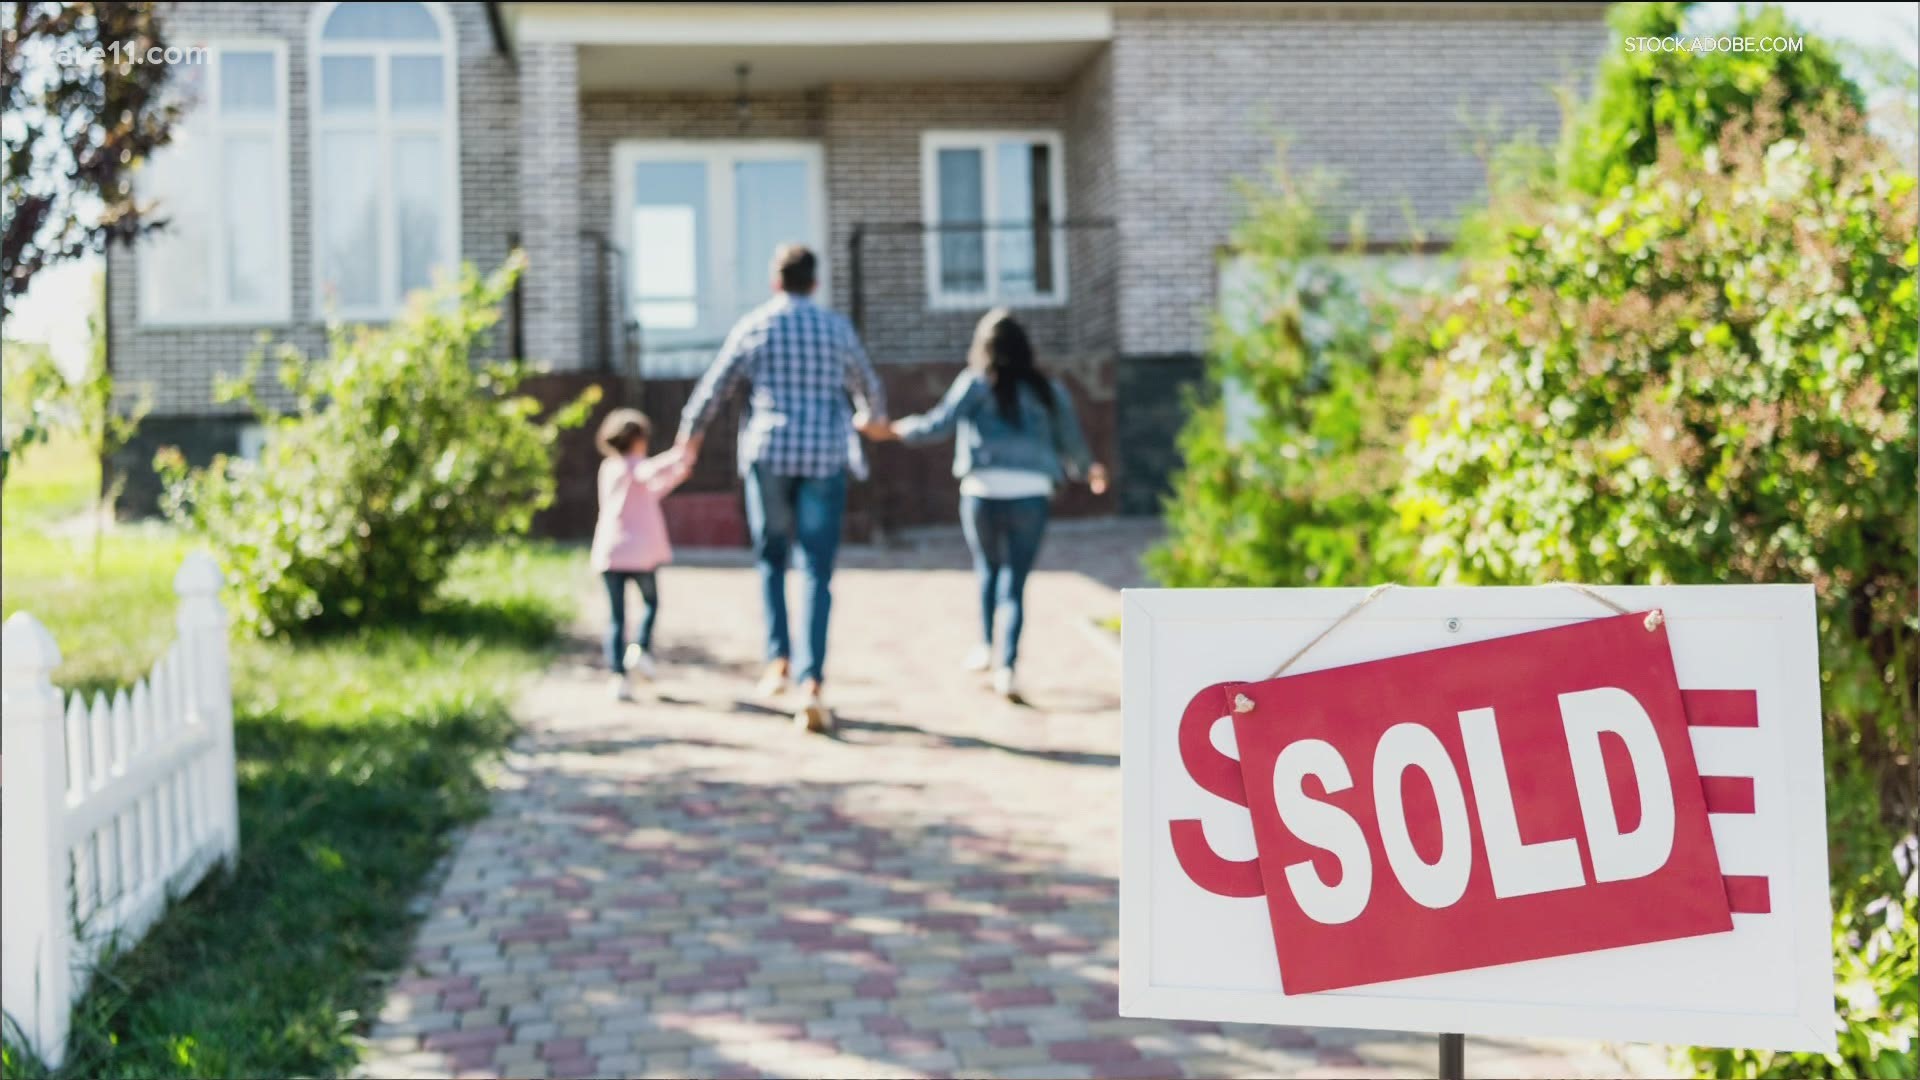 Here are some tips from a local realtor to consider before jumping into the market